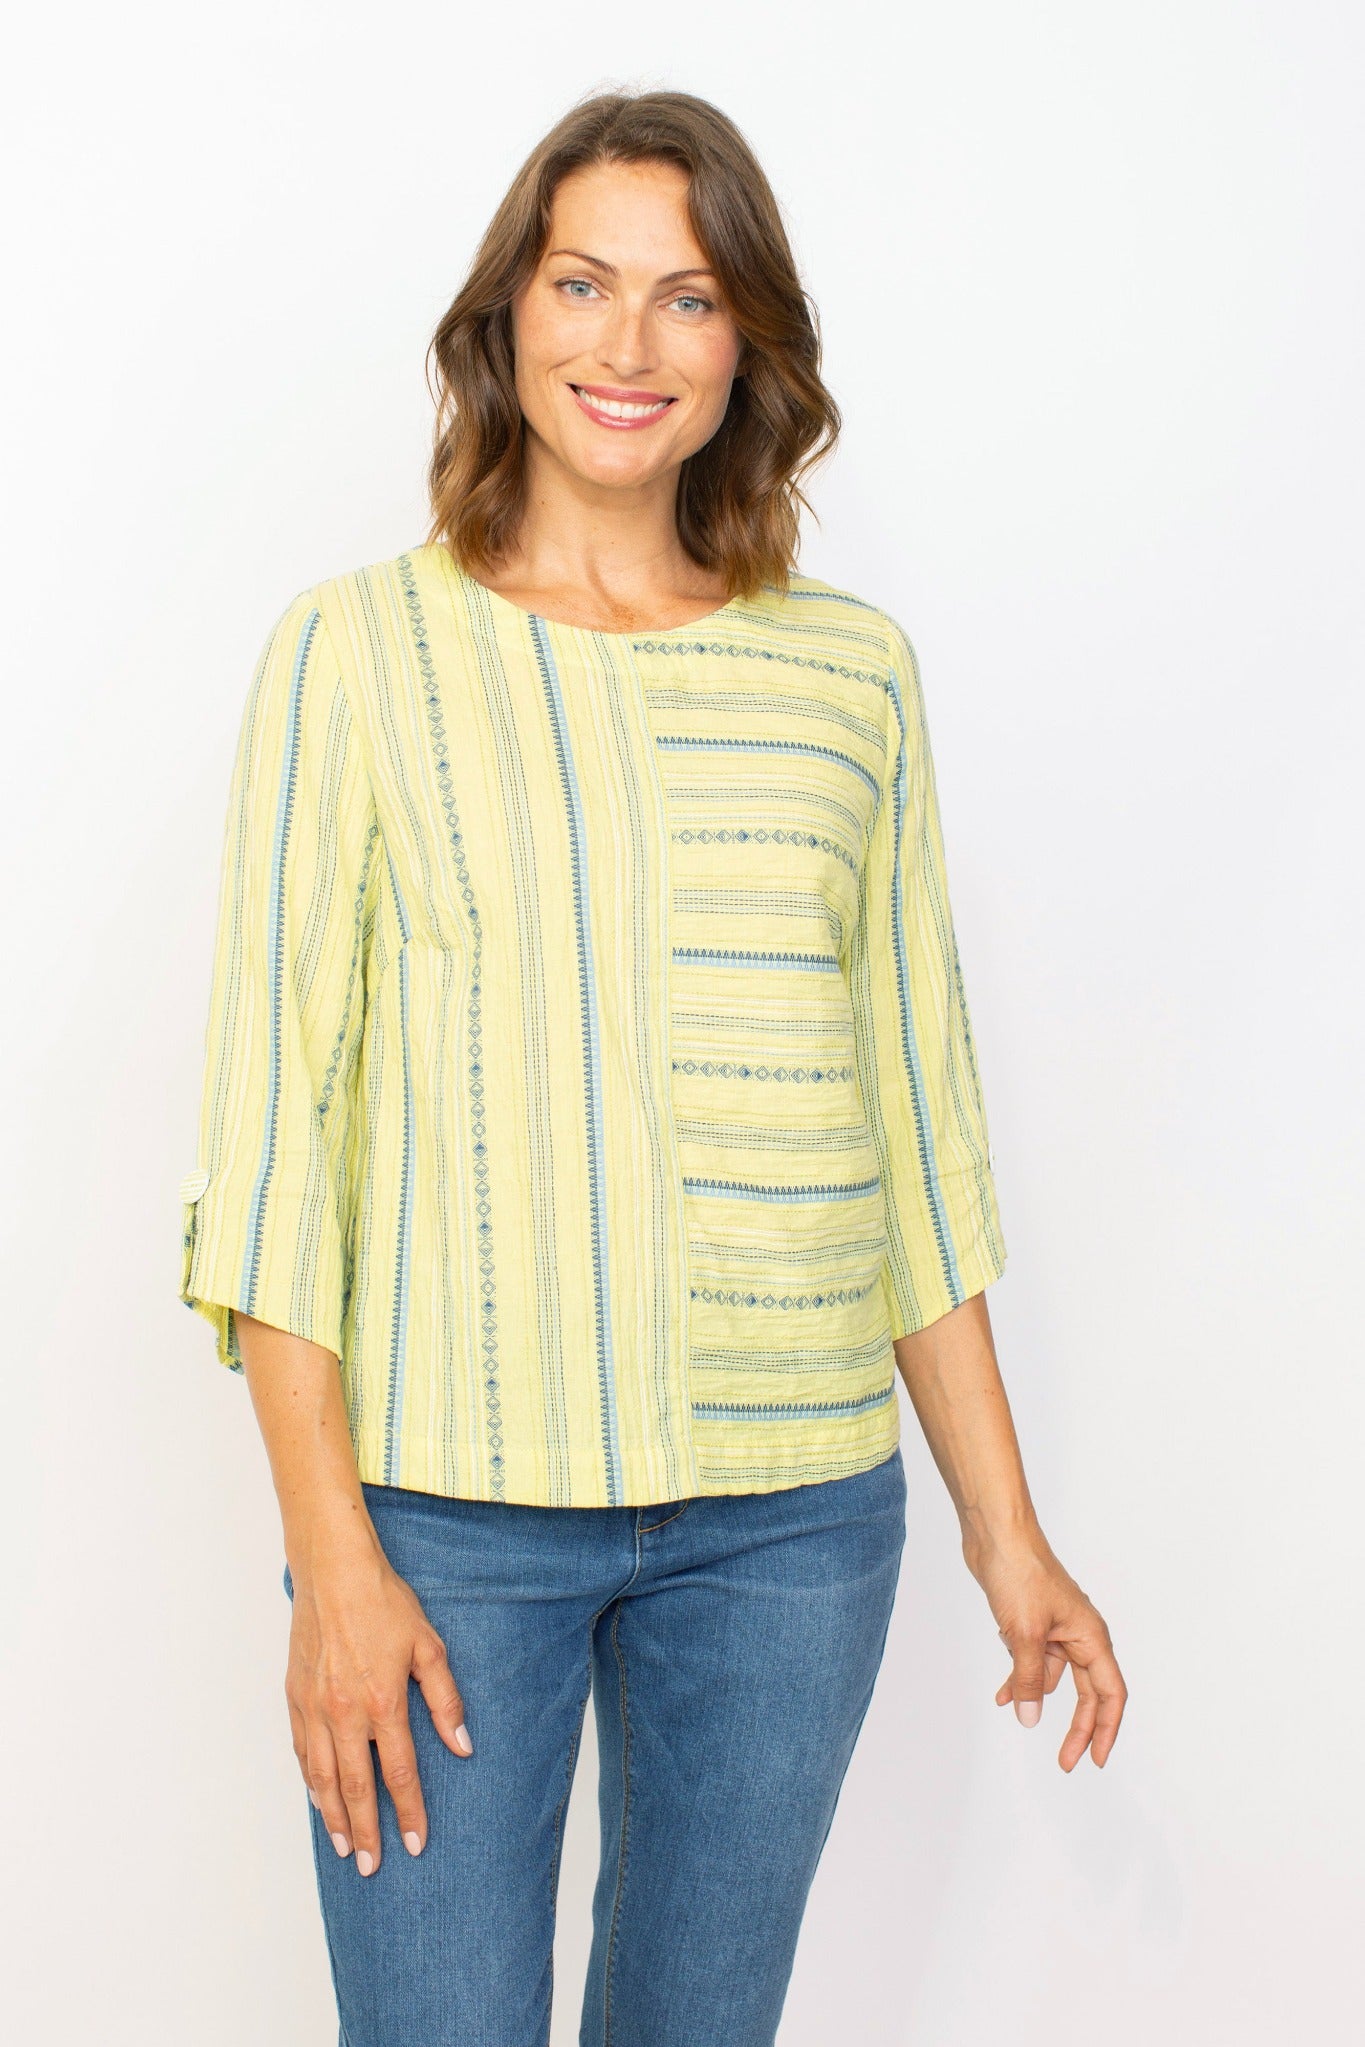 the Coastal Button Back Pullover in Aloe by Habitat. Its 3/4 slit sleeves with button detail add a touch of elegance to this versatile piece. Perfect for any occasion, this pullover offers both style and comfort.